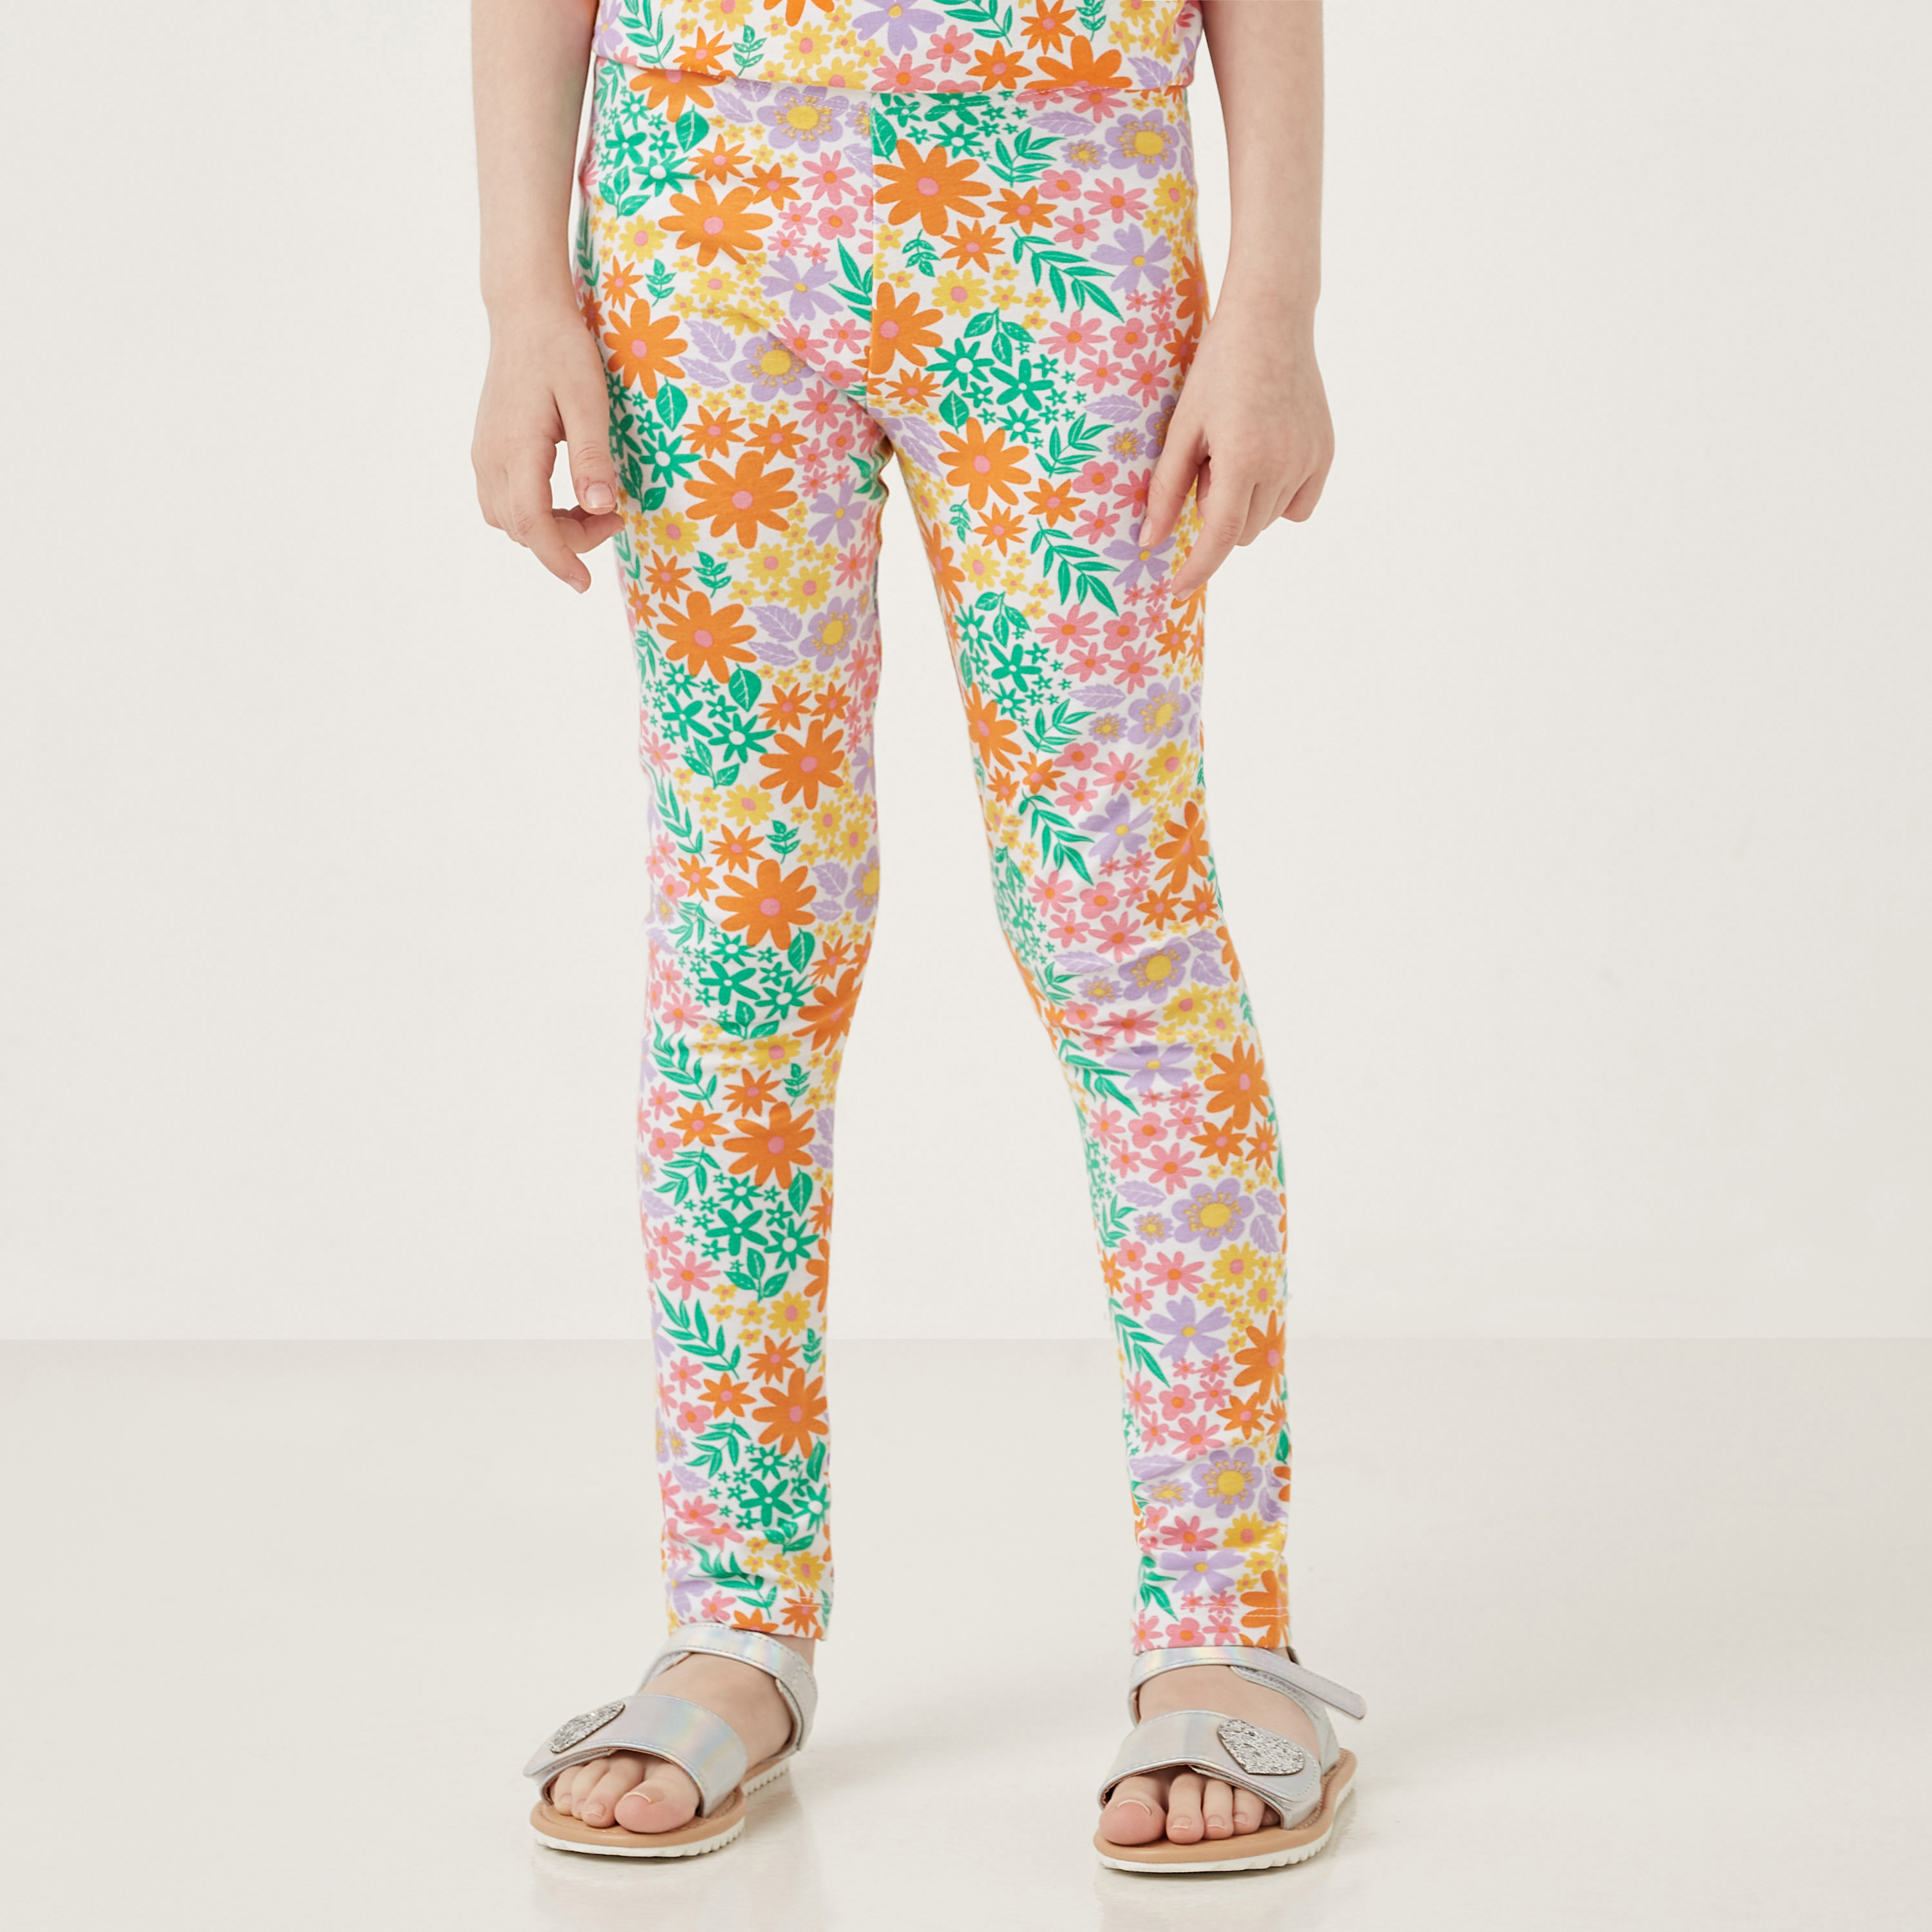 Tiger & Rose Patterned High-waisted Leggings – SILVERWIND